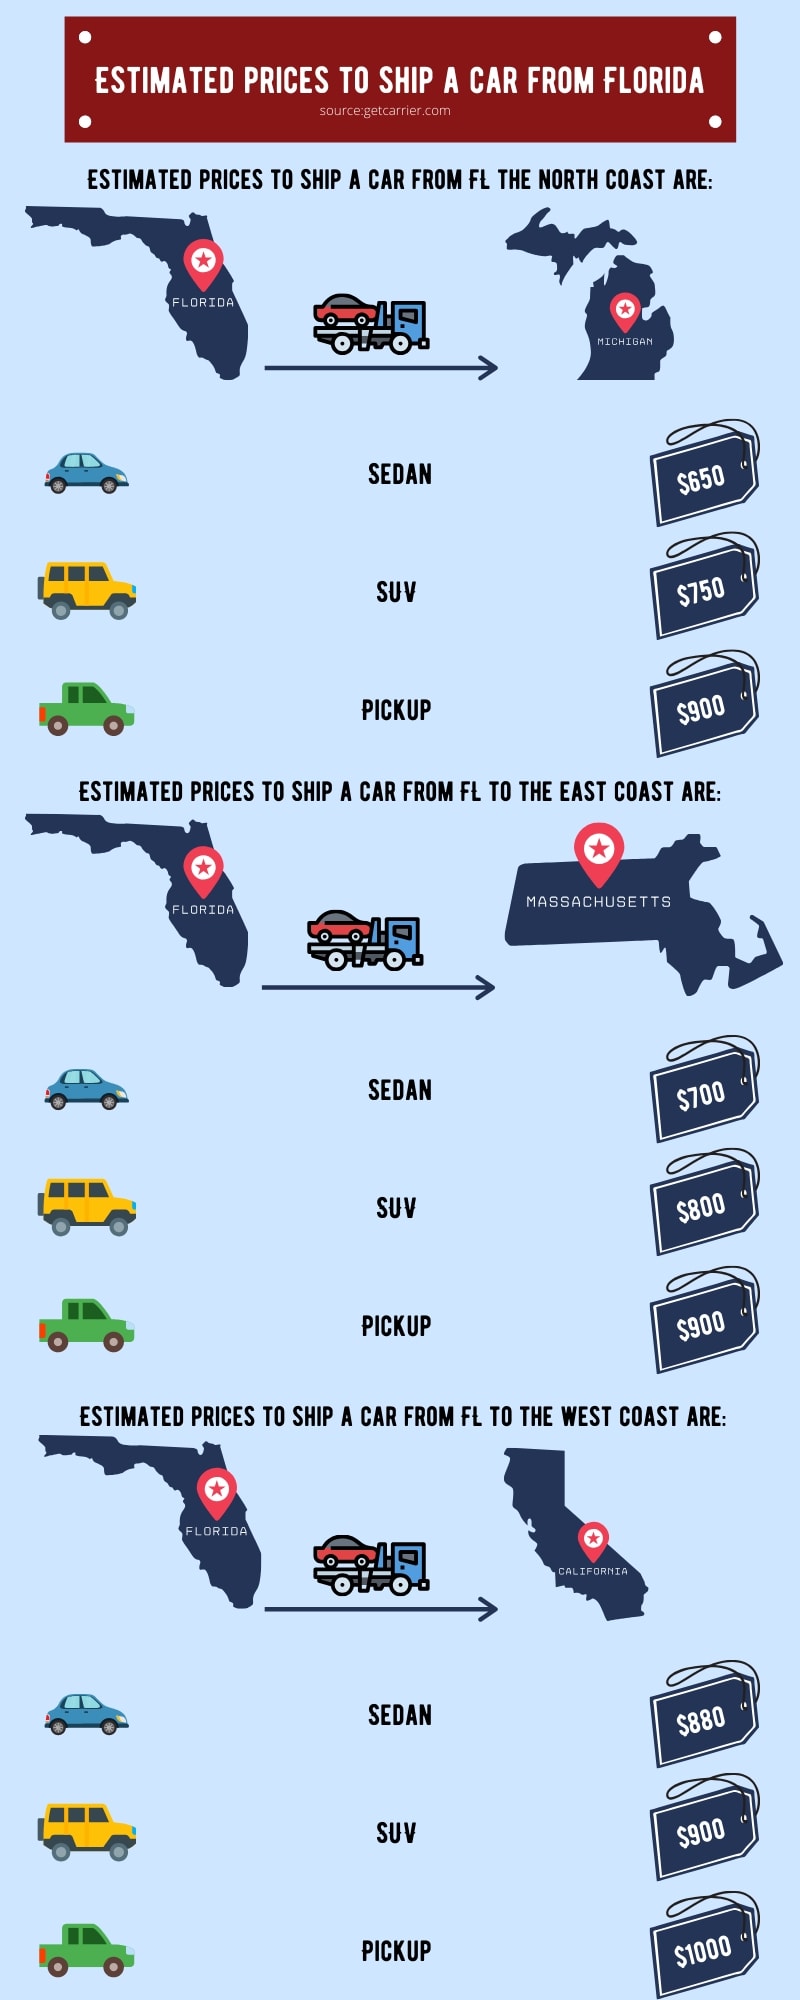 Estimated prices to ship a car from Florida Infographic